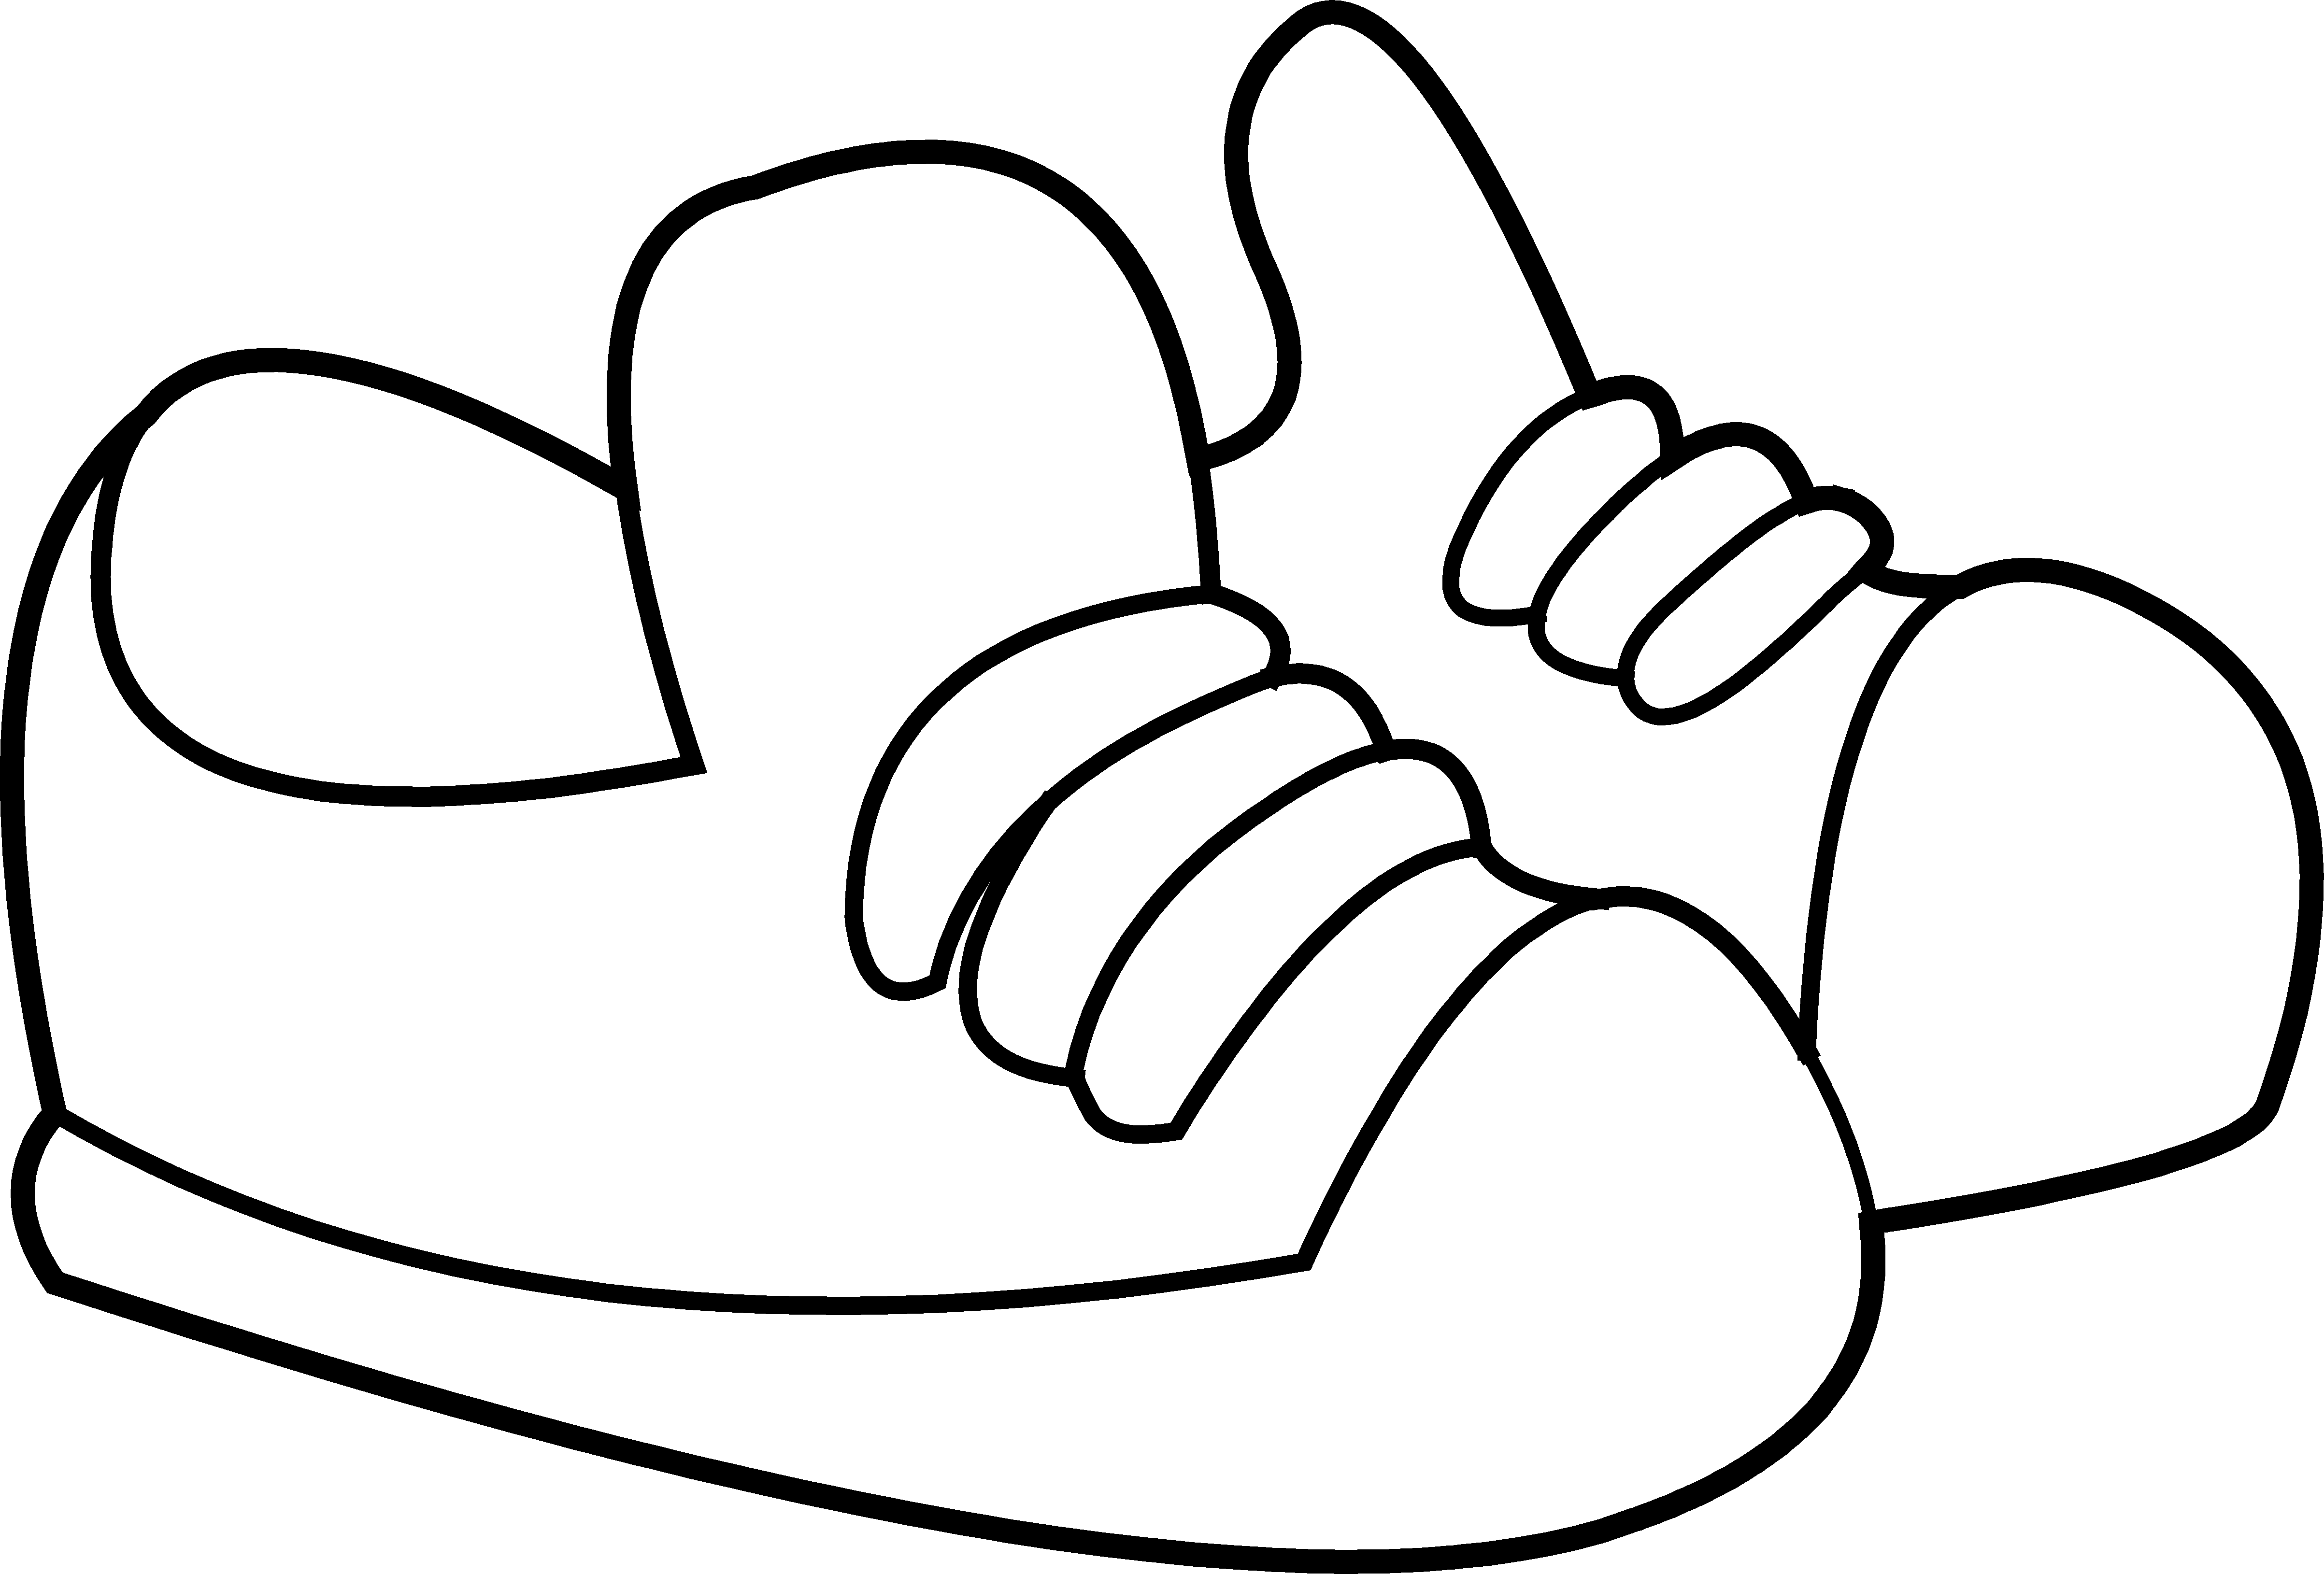 Handprint clipart blank. Kids sneakers coloring page